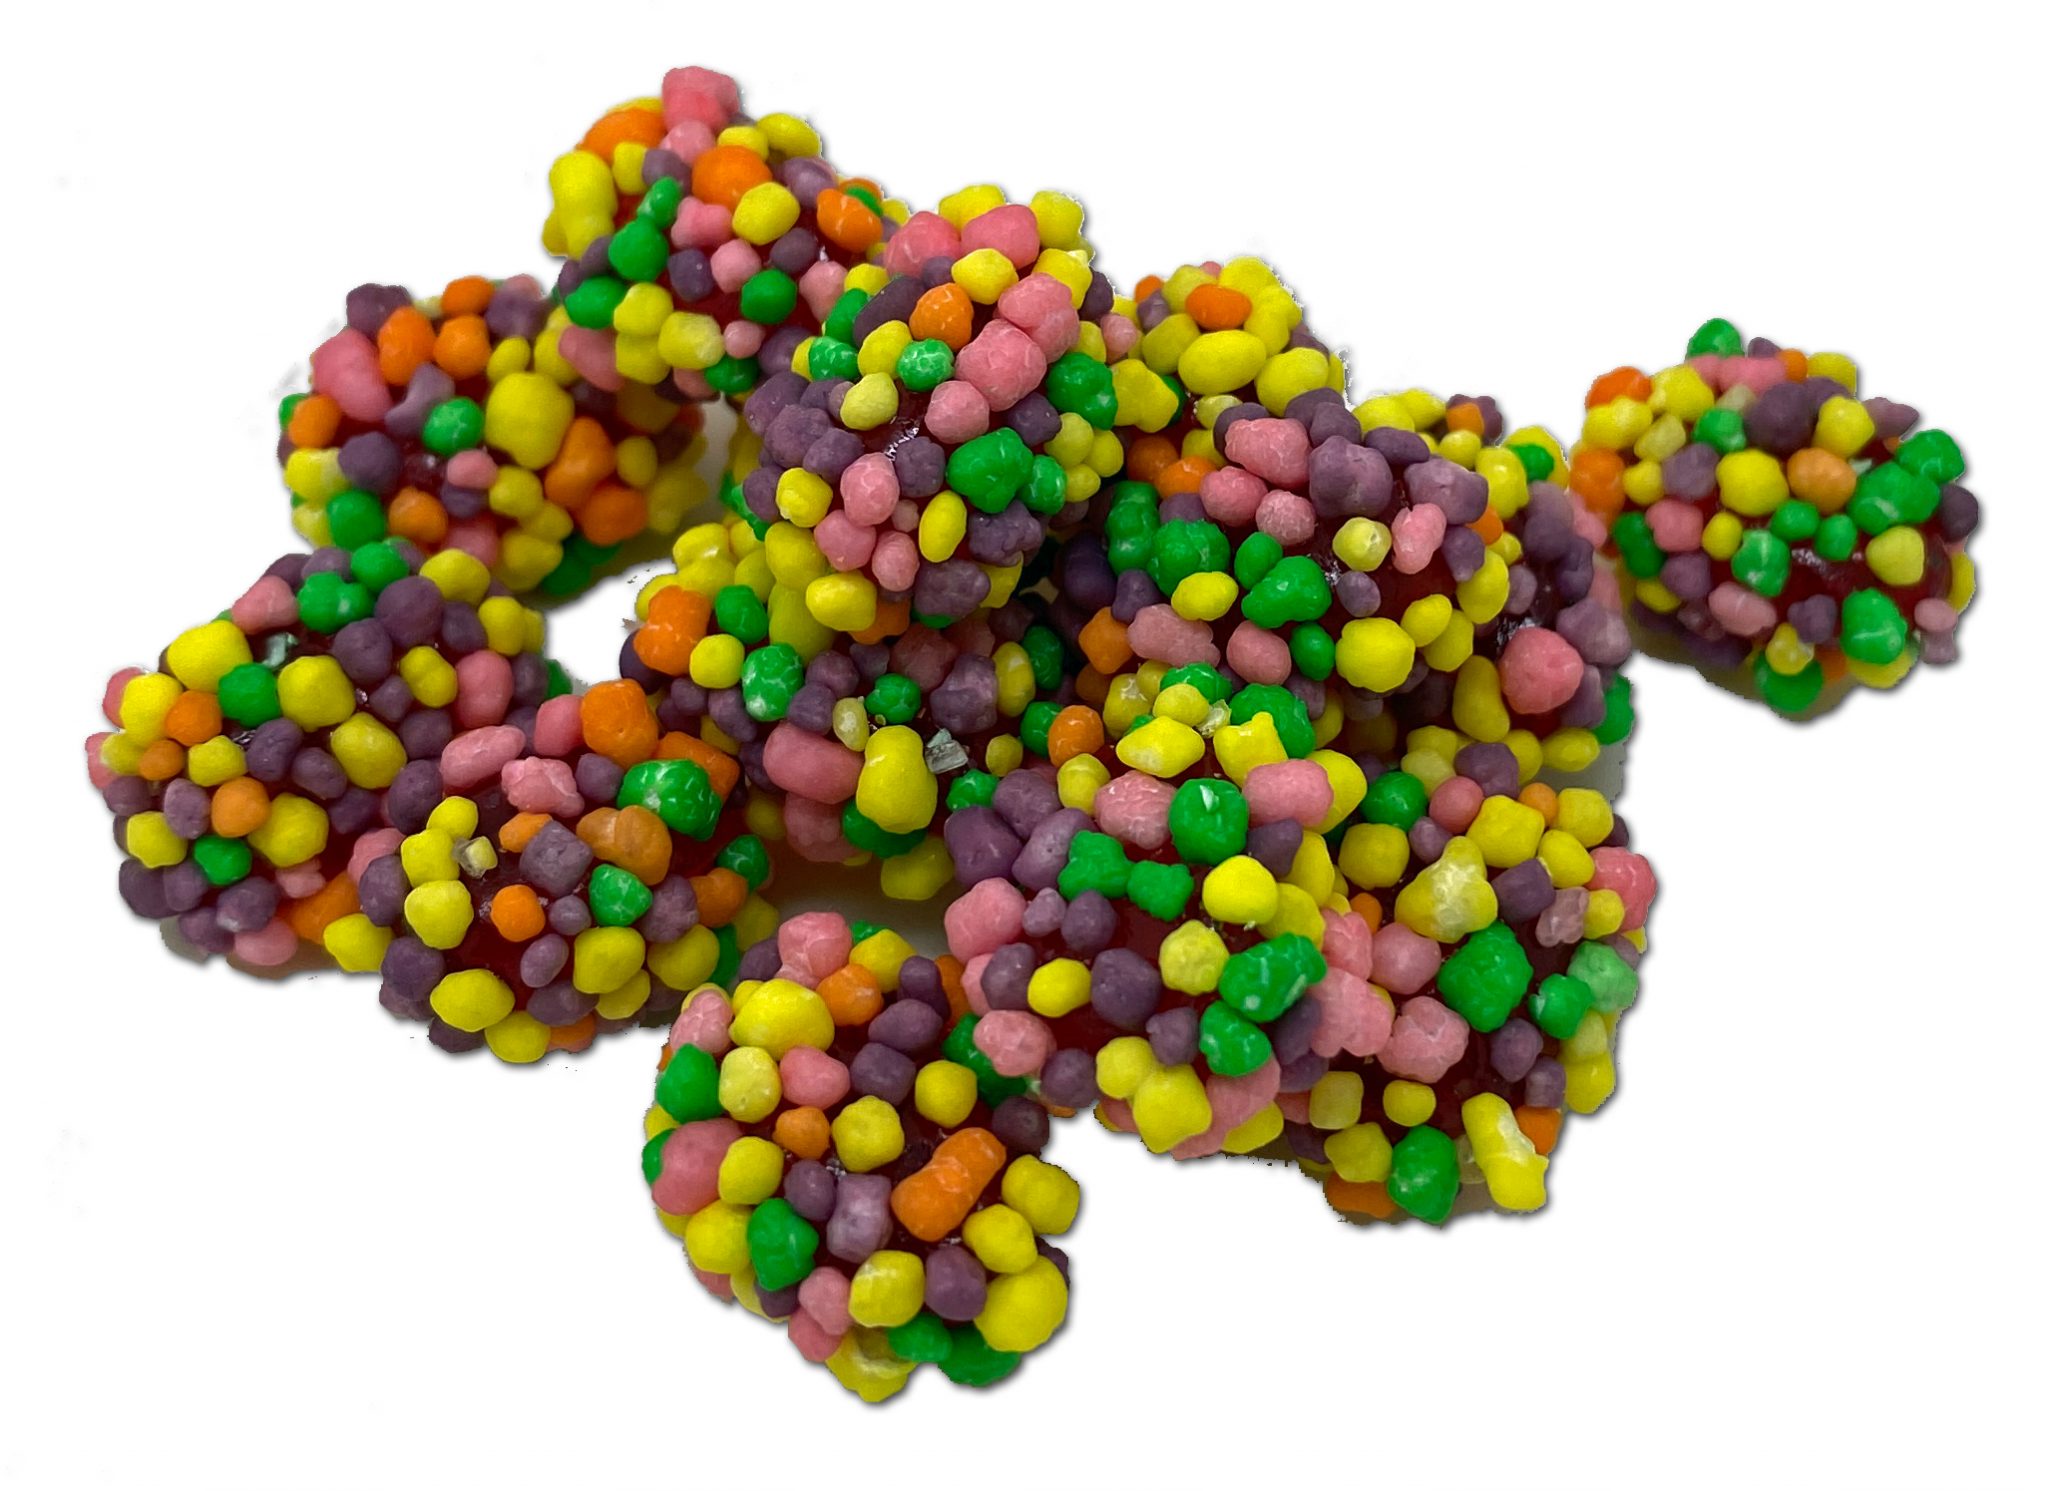 nerds rope clusters